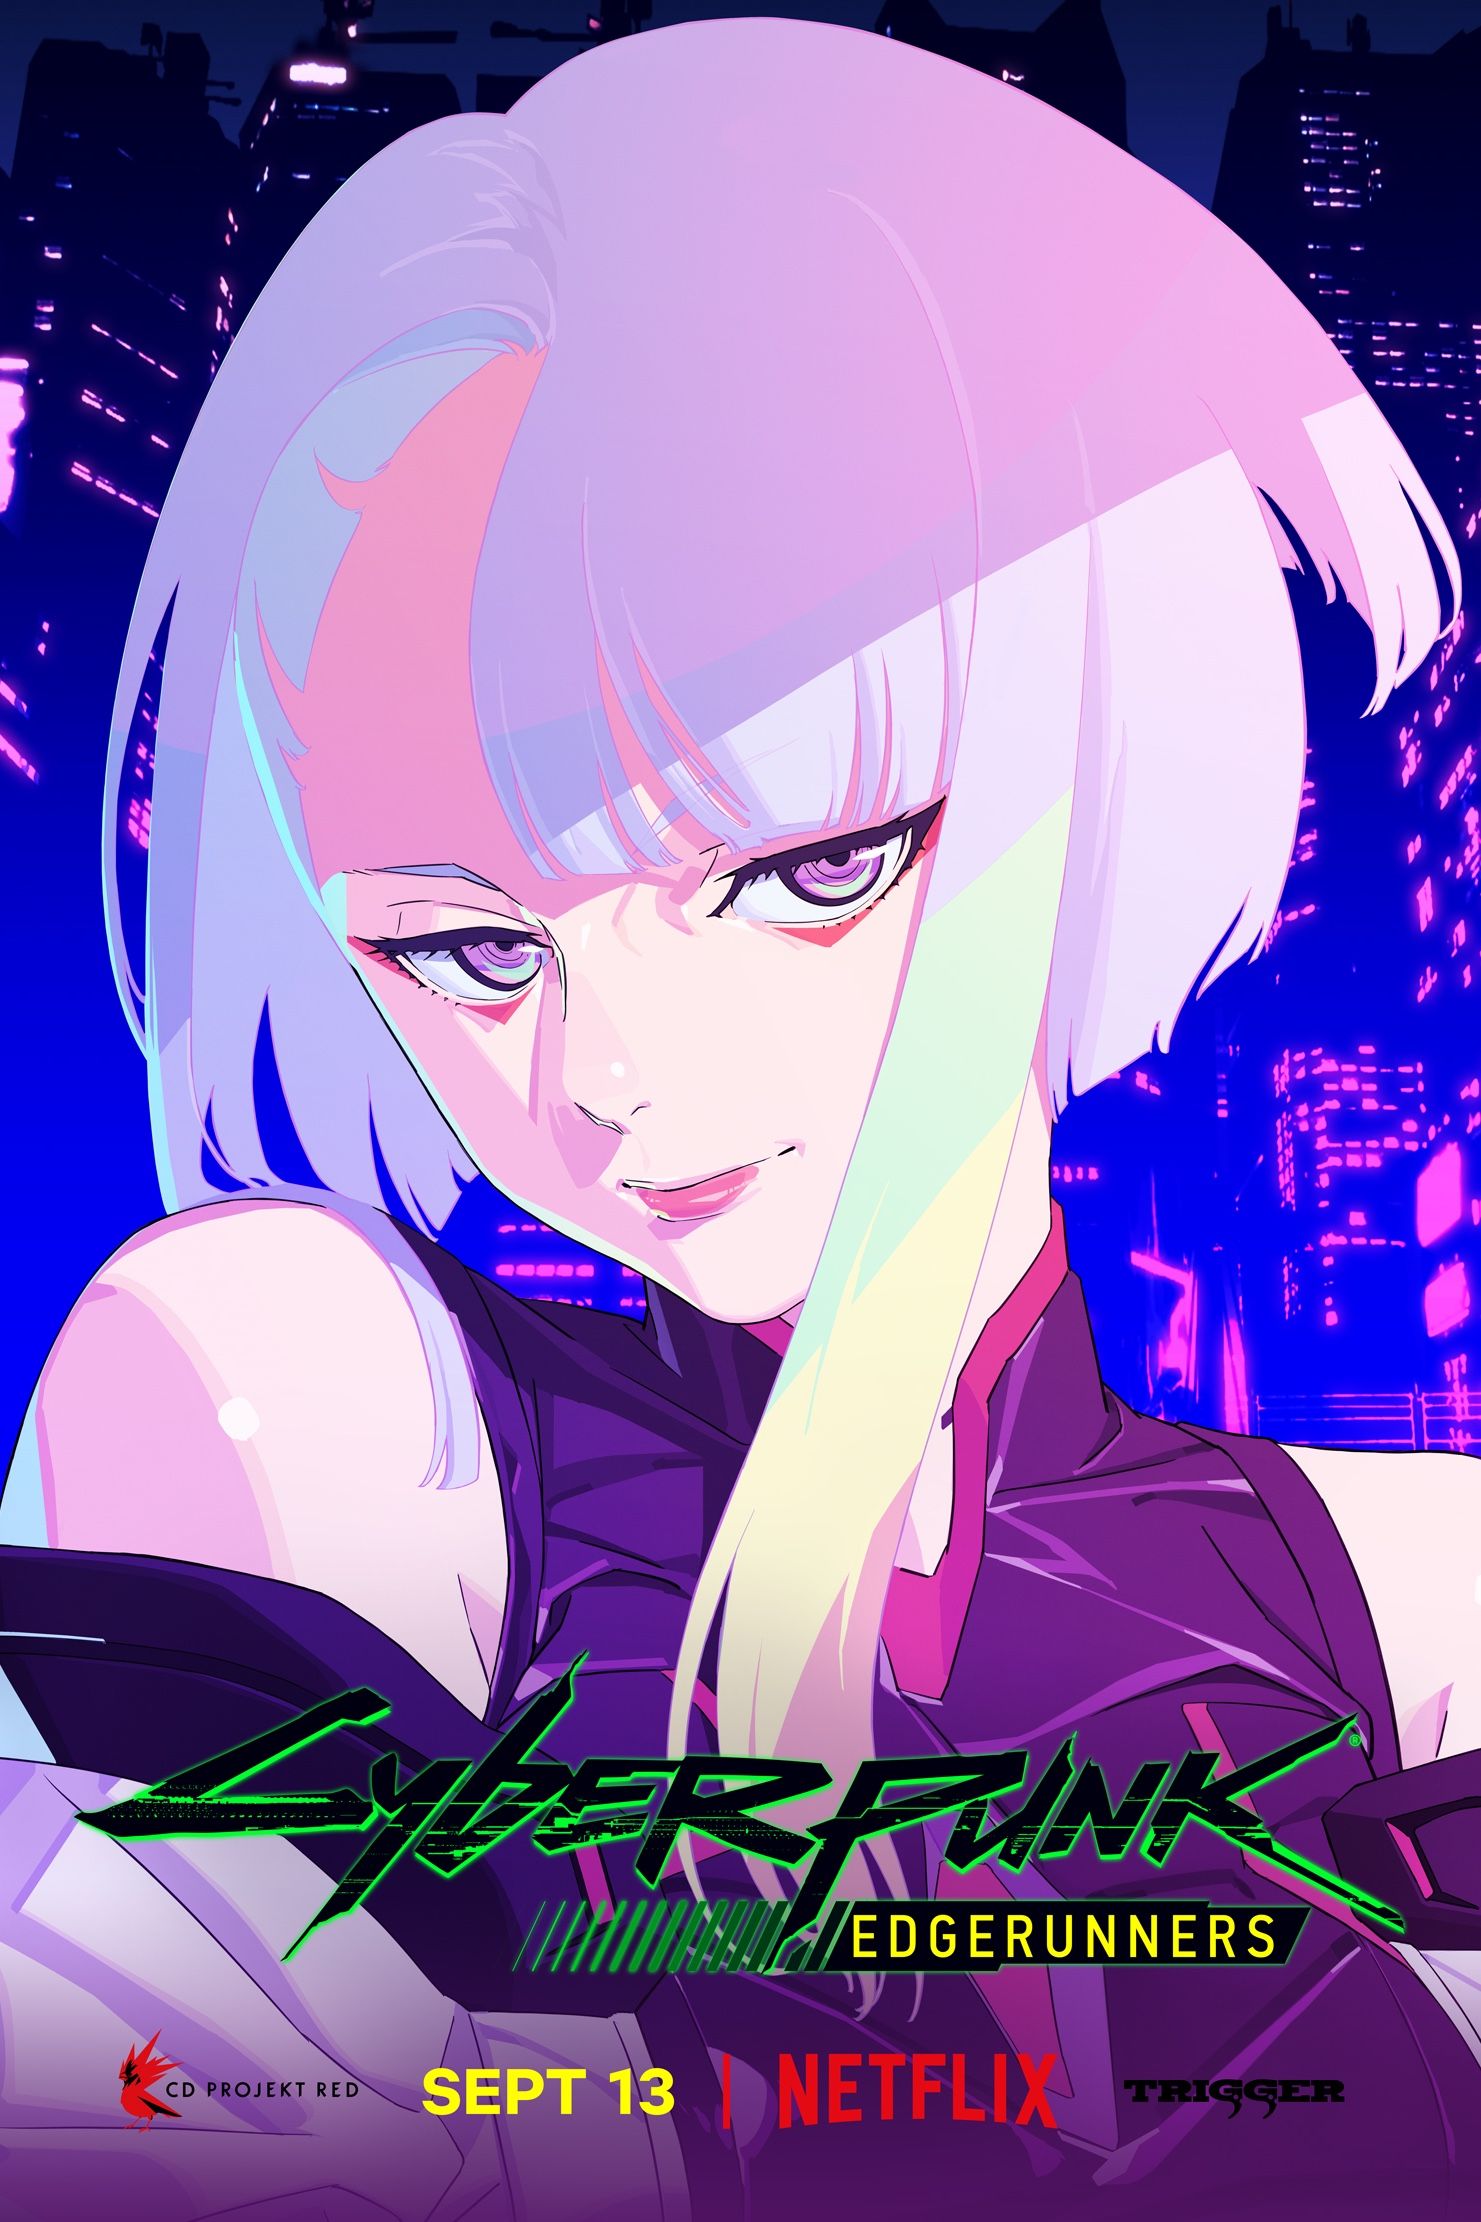 Lucy looks at the viewer on the Cyberpunk Edgerunners Poster